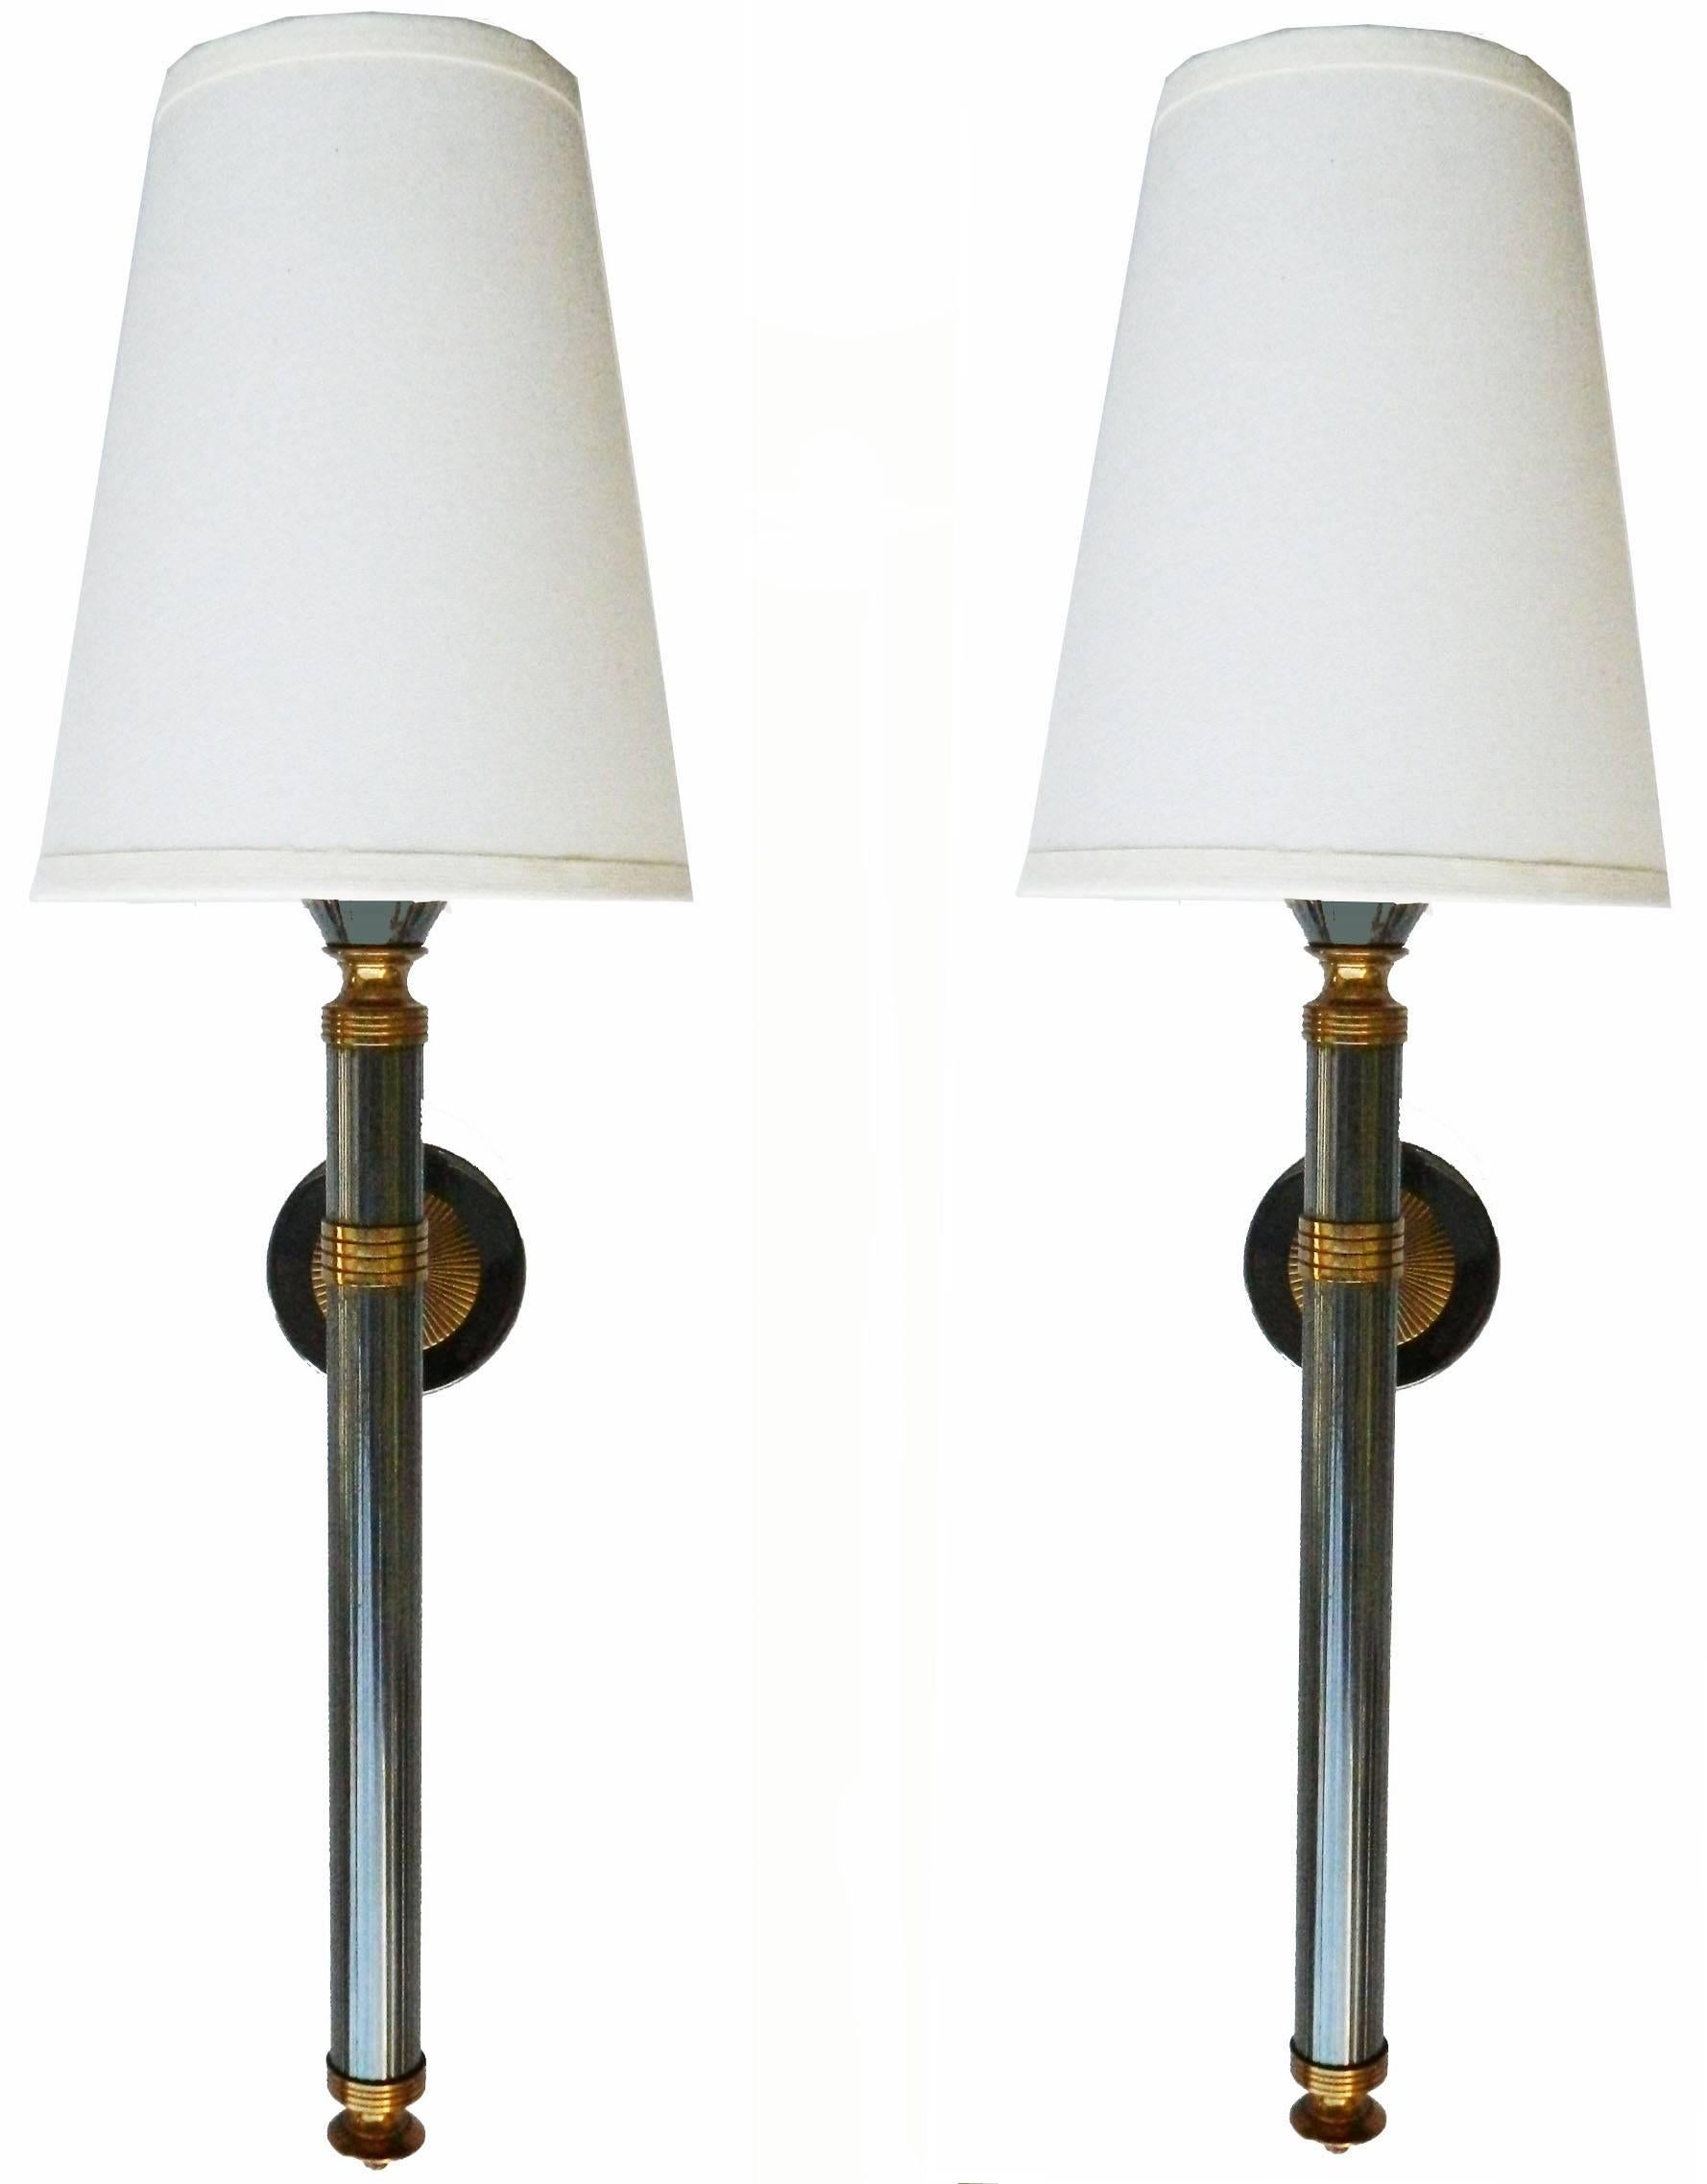 Very elegant pair of Maison Jansen sconces, two patina, brass and gun metal.
One bulb, 75 watt max.
US rewired and in working condition.
Backplate: 3.1/4